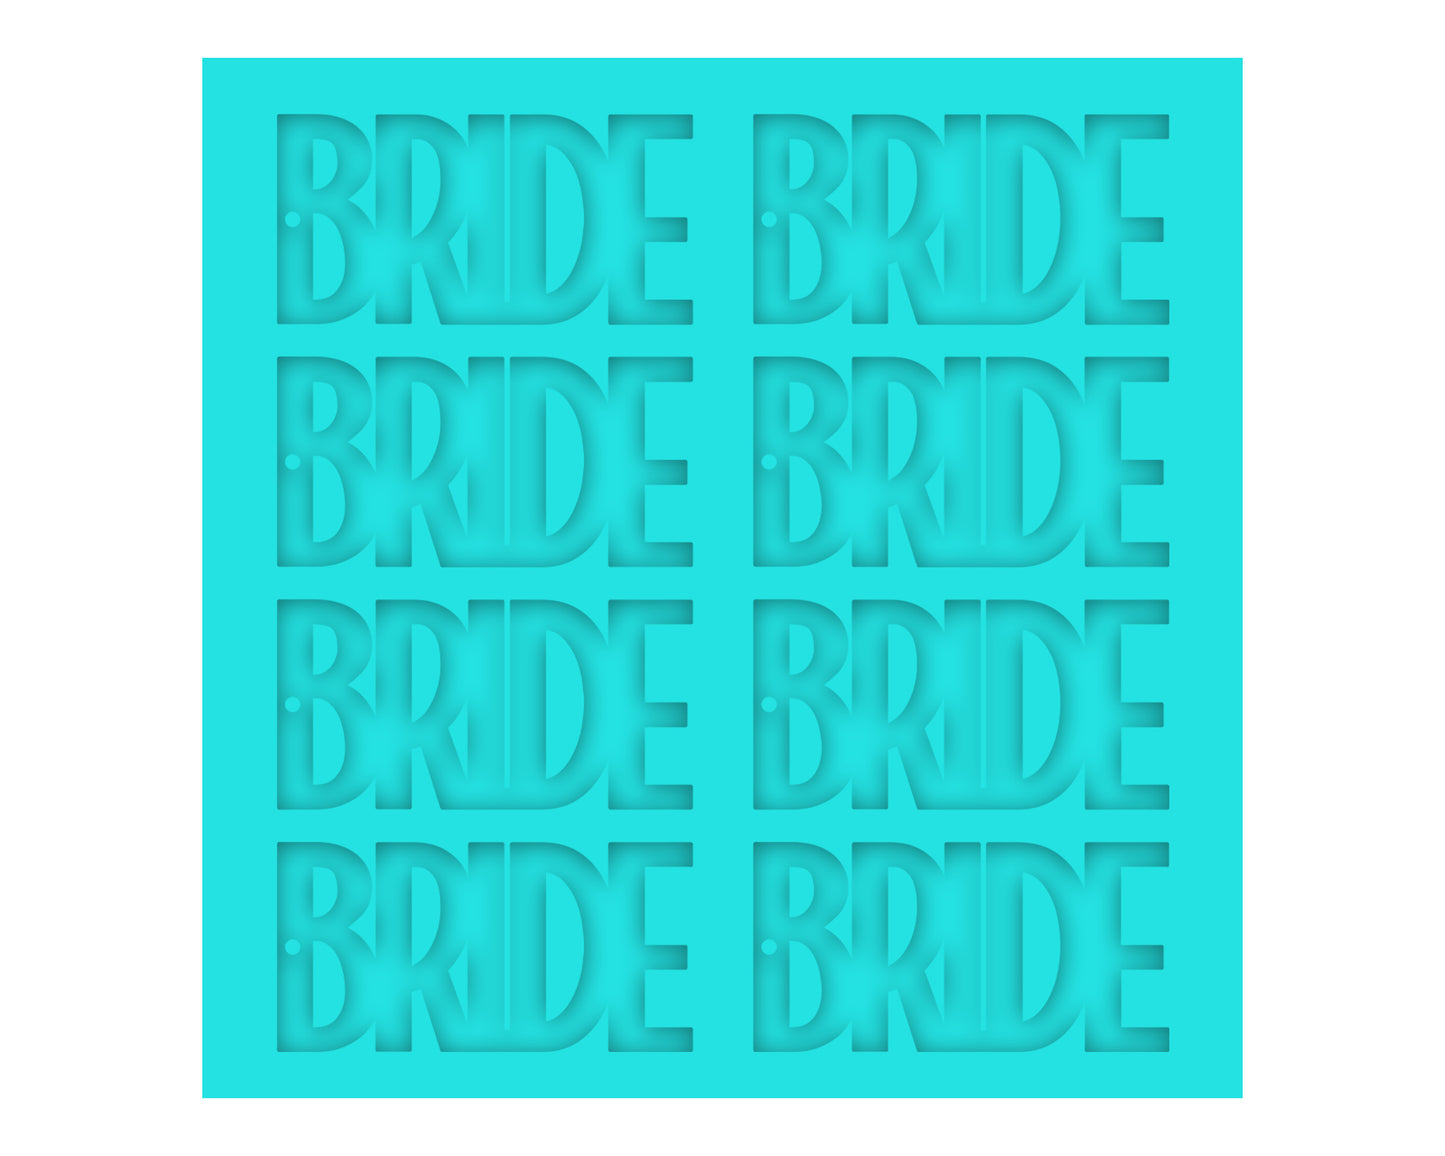 a cookie sheet with the words bride and bridesmaid on it